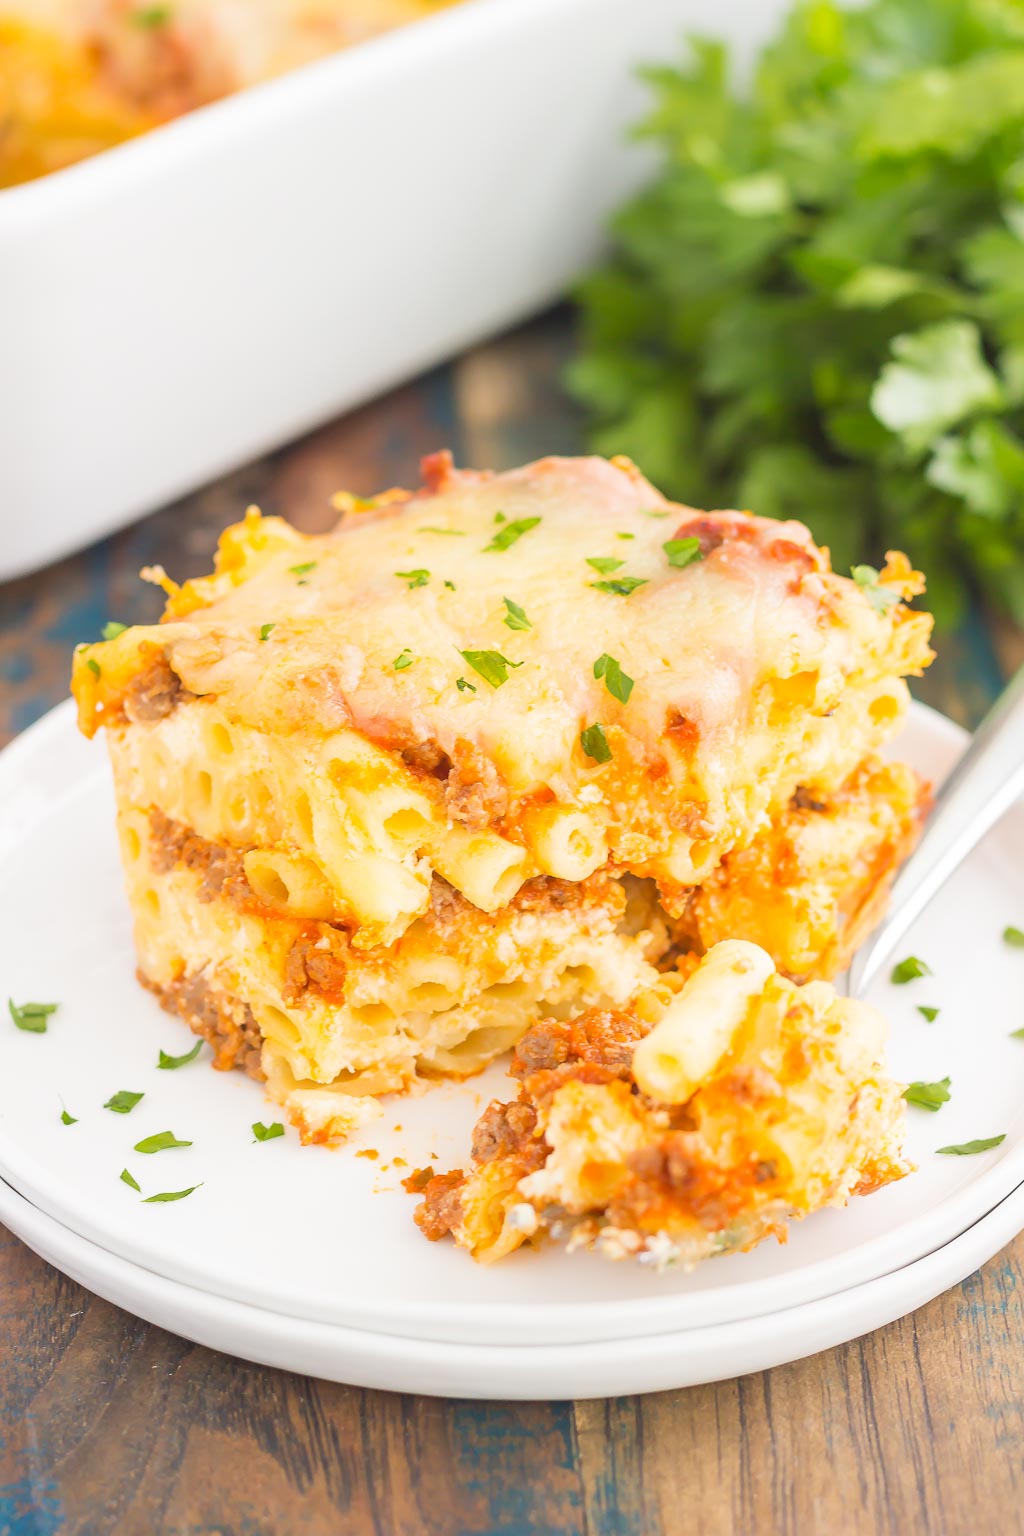 This Easy Baked Ziti is made with simple ingredients, full of flavor, and ready in less than an hour. Loaded with an easy meat sauce, tender pasta, and three types of cheese, this comfort dish is sure to be a dinnertime crowd-pleaser!